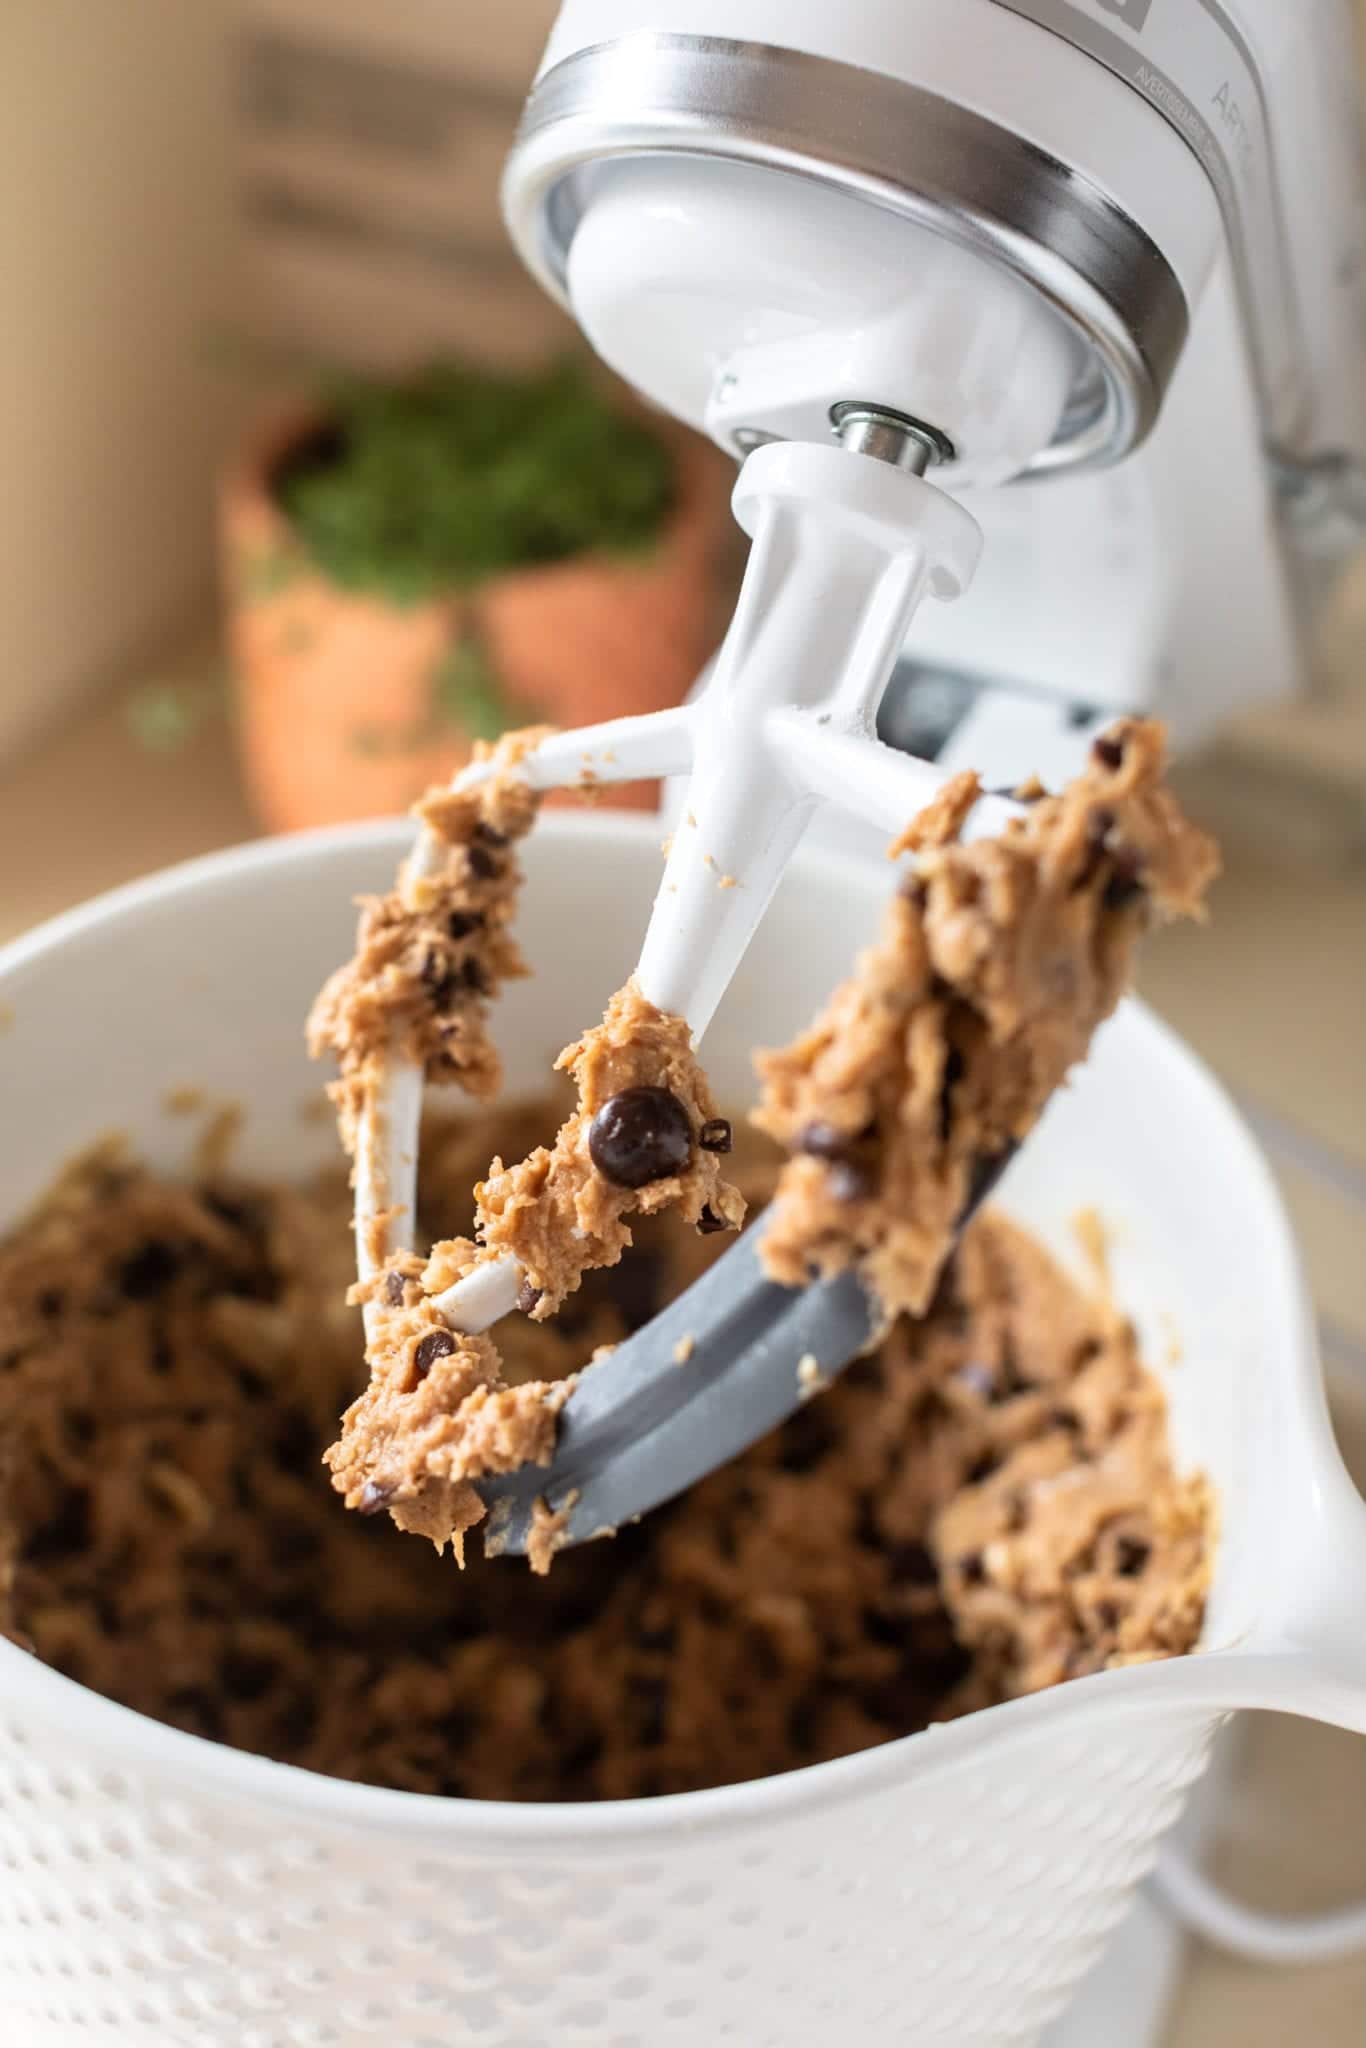 DoubleTree's Signature Chocolate Chip Cookie dough in white stand mixer ready to scoop #cookie #chocolatechipcookie #doubletreesignaturecookie #baking